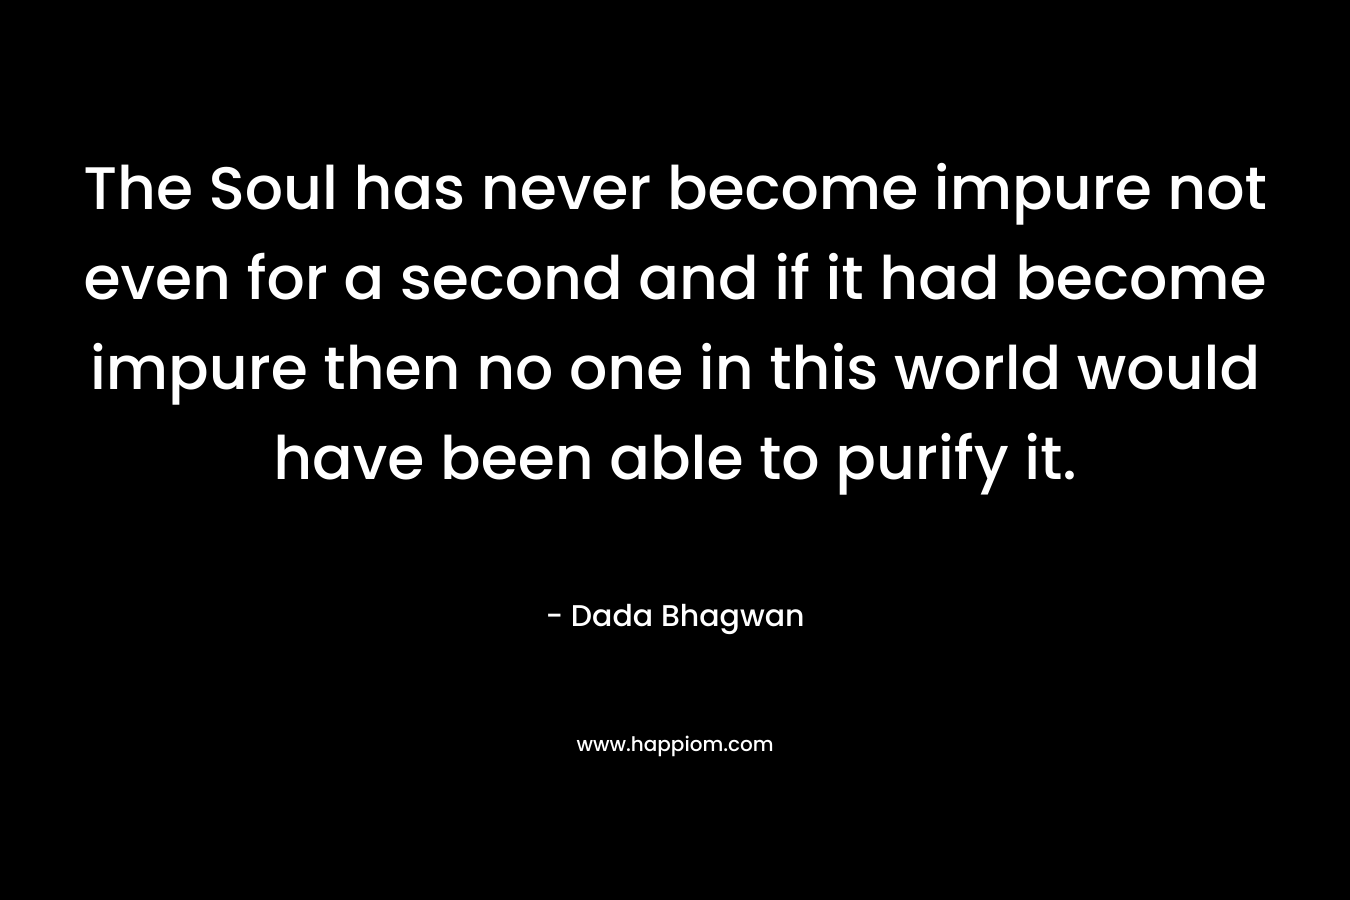 The Soul has never become impure not even for a second and if it had become impure then no one in this world would have been able to purify it.